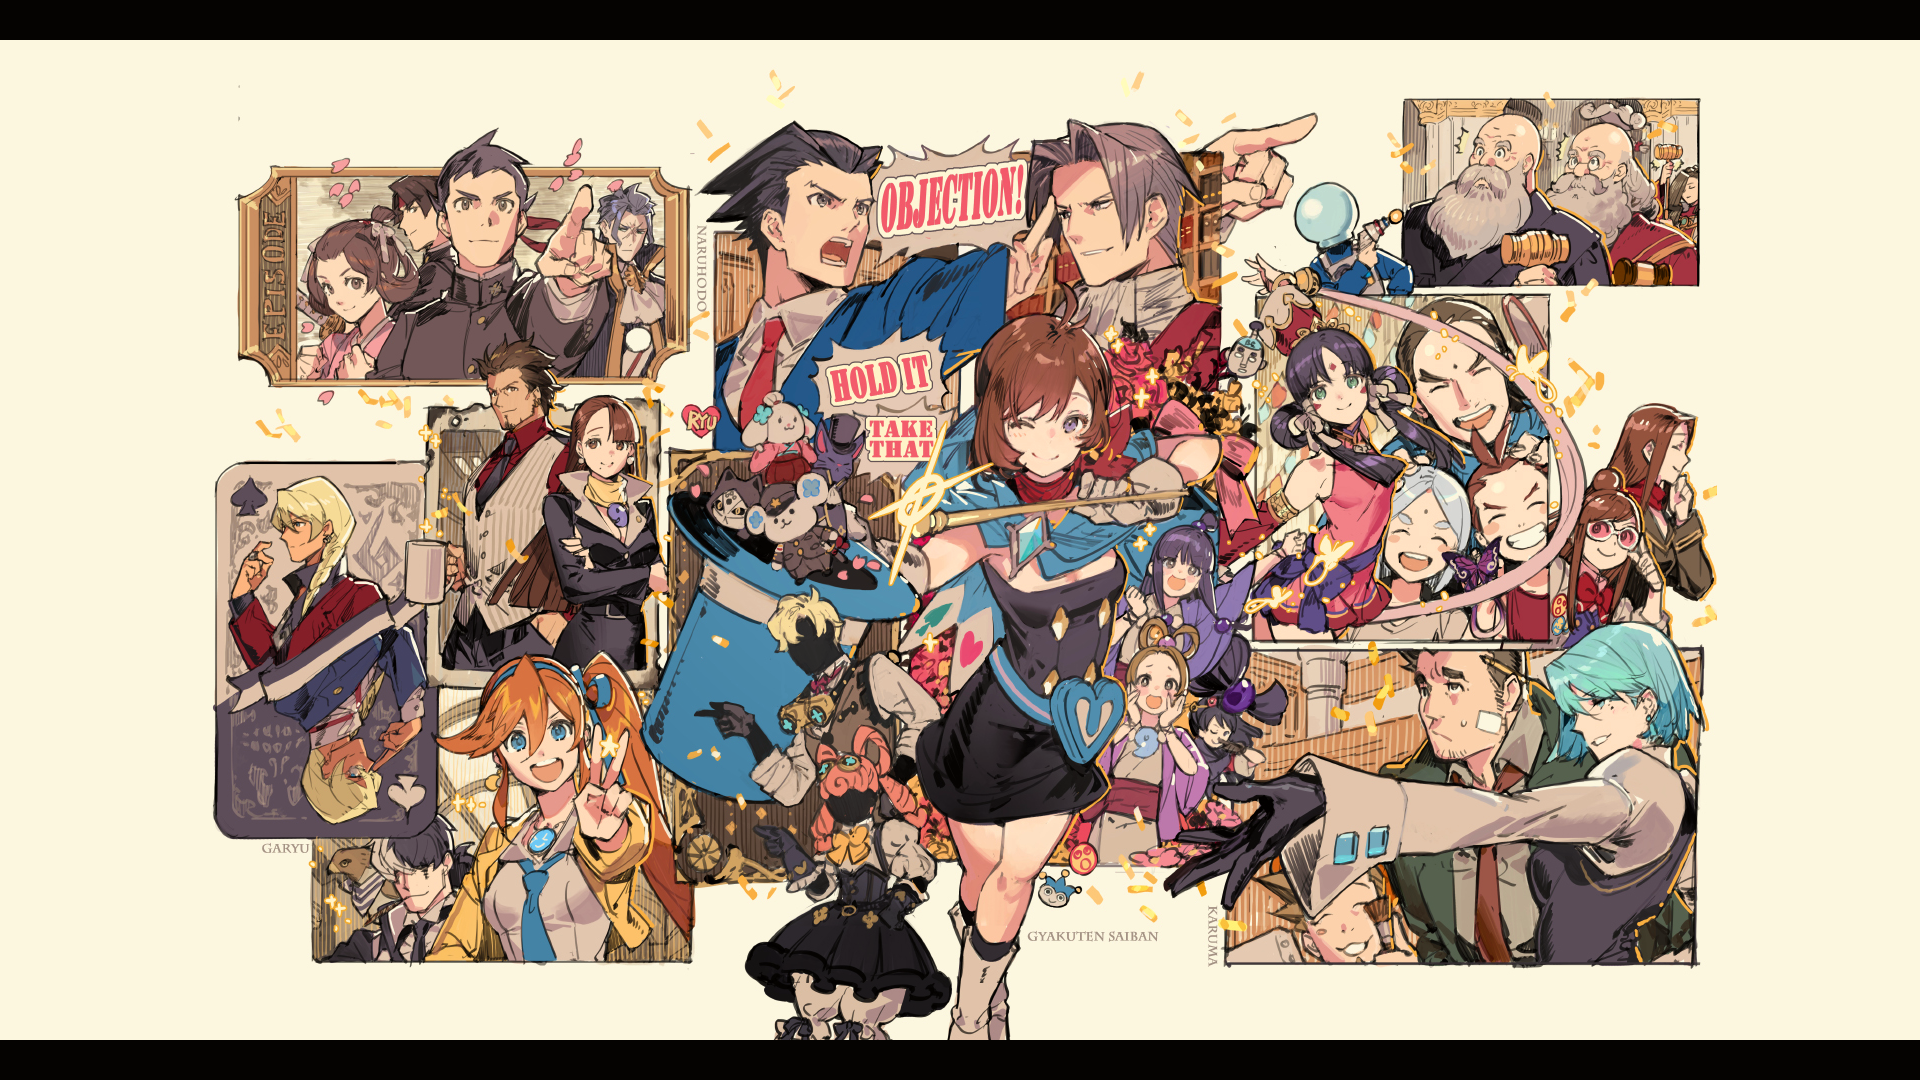 Anime 1920x1080 video games Capcom video game girls video game men ace attorney phoenix wright Miles Edgeworth Trucy Wright Franziska von Karma Maya Fey Mia Fey Dick Gumshoe Ryunosuke Naruhodo Susato Mikotoba Sherlock Holmes Athena Cykes Godot Herlock Sholmes (Ace Attorney) Iris Wilson (Ace Attorney) Klavier Gavin (Ace Attorney) Kristoph Gavin (Ace Attorney) Judge Barok van Zieks (Ace Attorney) Apollo Justice Rayfa Padma Khura'in (Ace Attorney) Dhurke Sahdmadhi (Ace Attorney) Nahyuta Sahdmadhi (Ace Attorney) Steel Samurai (Ace Attorney) Wendy Oldbag (Ace Attorney) Pearl Fey Kay Faraday Kazuma Asogi collage coffee mug coffee cup playing cards peace sign long hair short hair Spiky Hair redhead brunette red tie bangs blunt bangs pink hair blue hair top hat ponytail vest dress scarf red scarfs Ema Skye Larry Butz suit and tie suits finger pointing beads necklace hammer gray hair hawks jewel Starshadowmagic